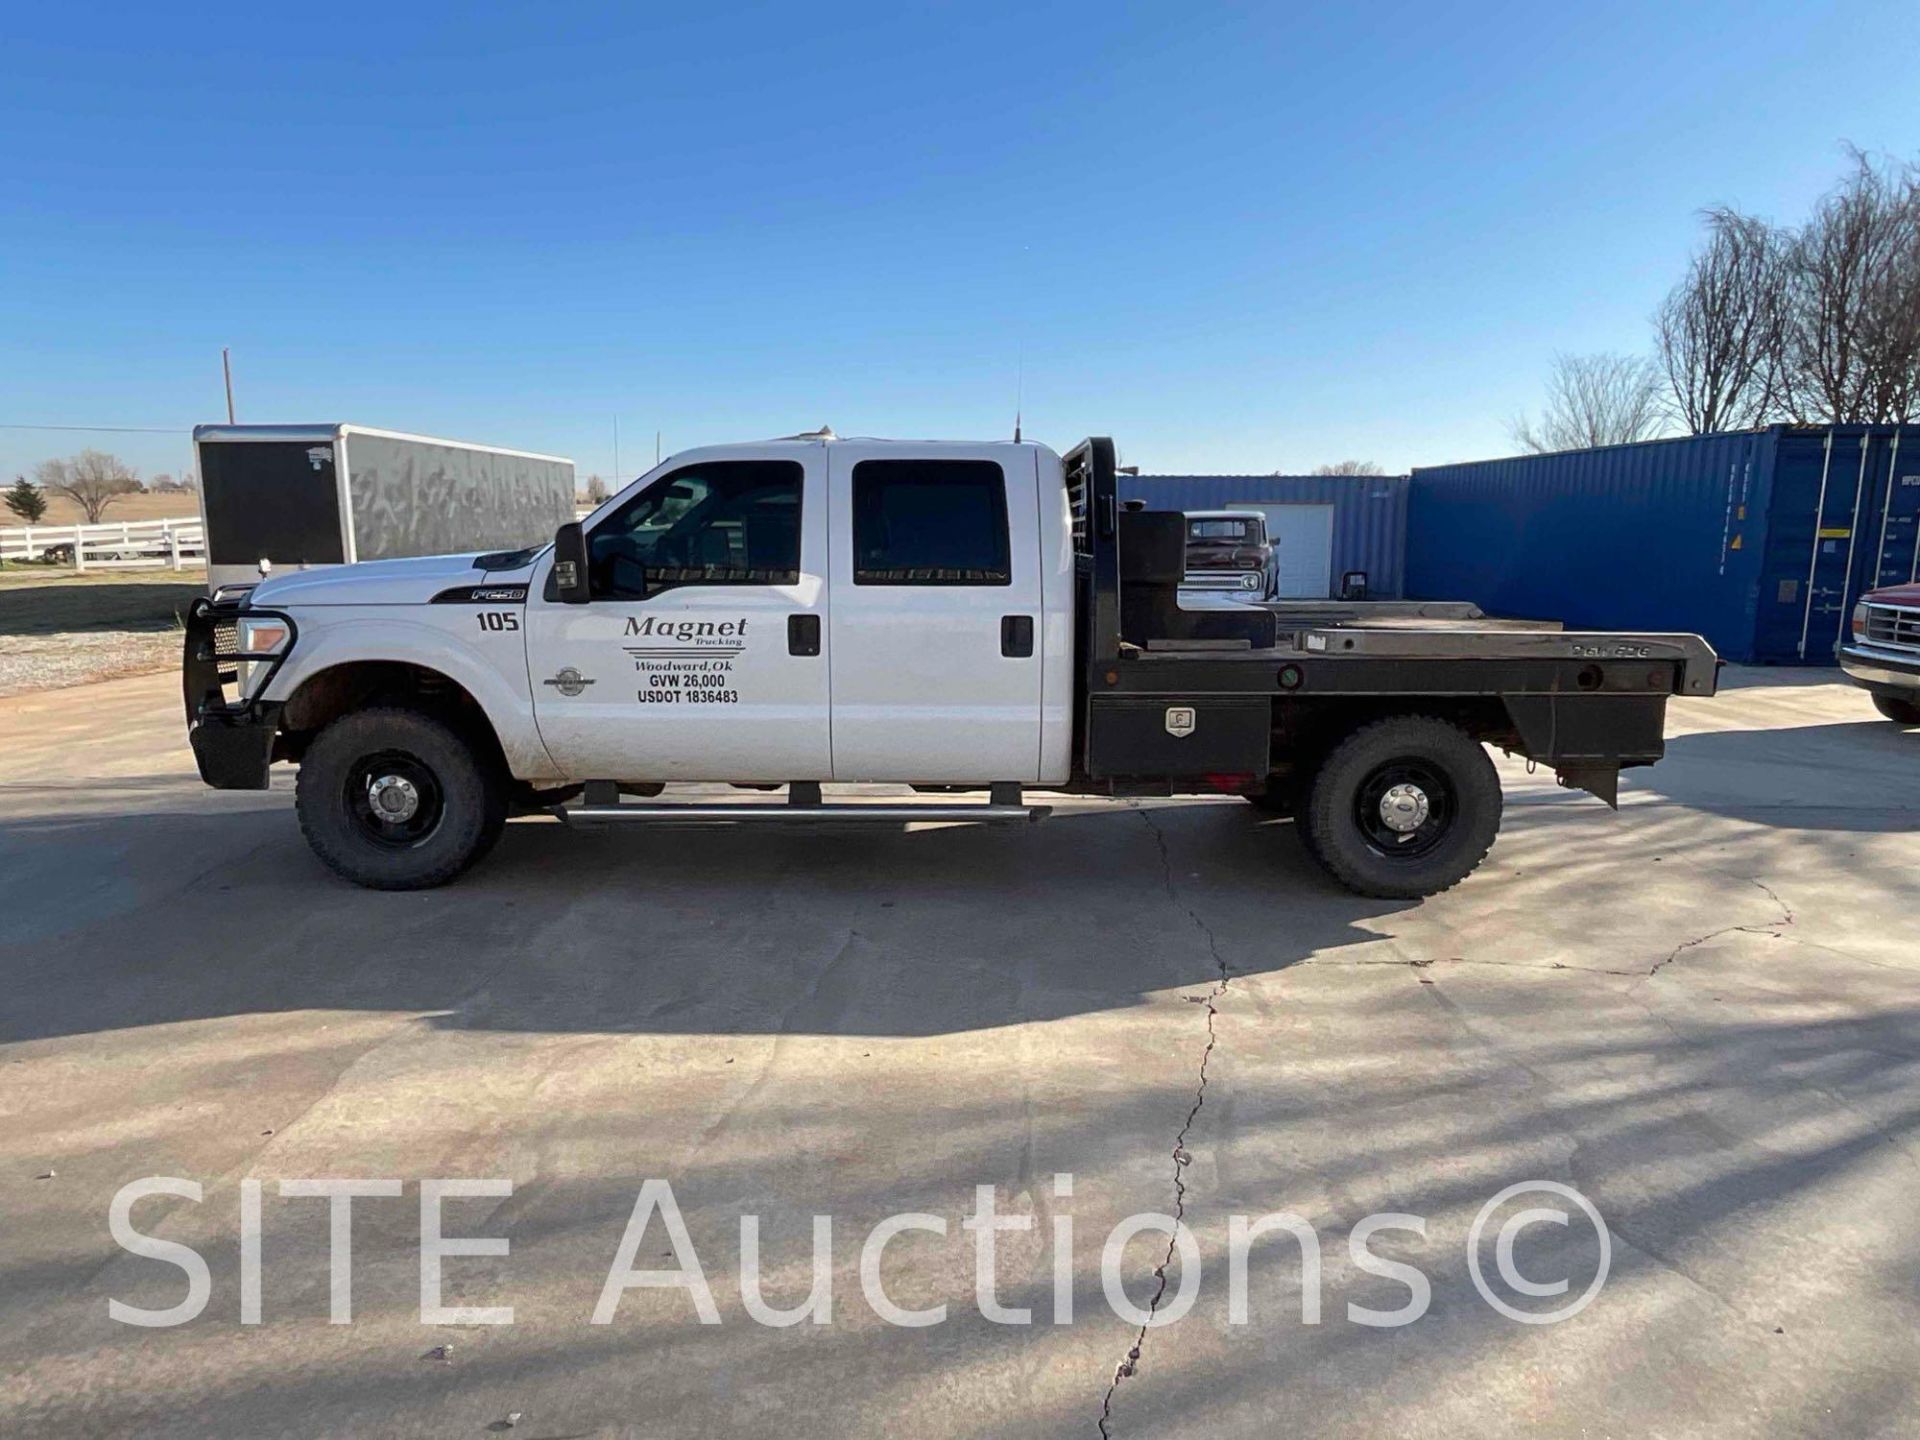 2011 Ford F250 SD Crew Cab Flatbed Truck - Image 8 of 31